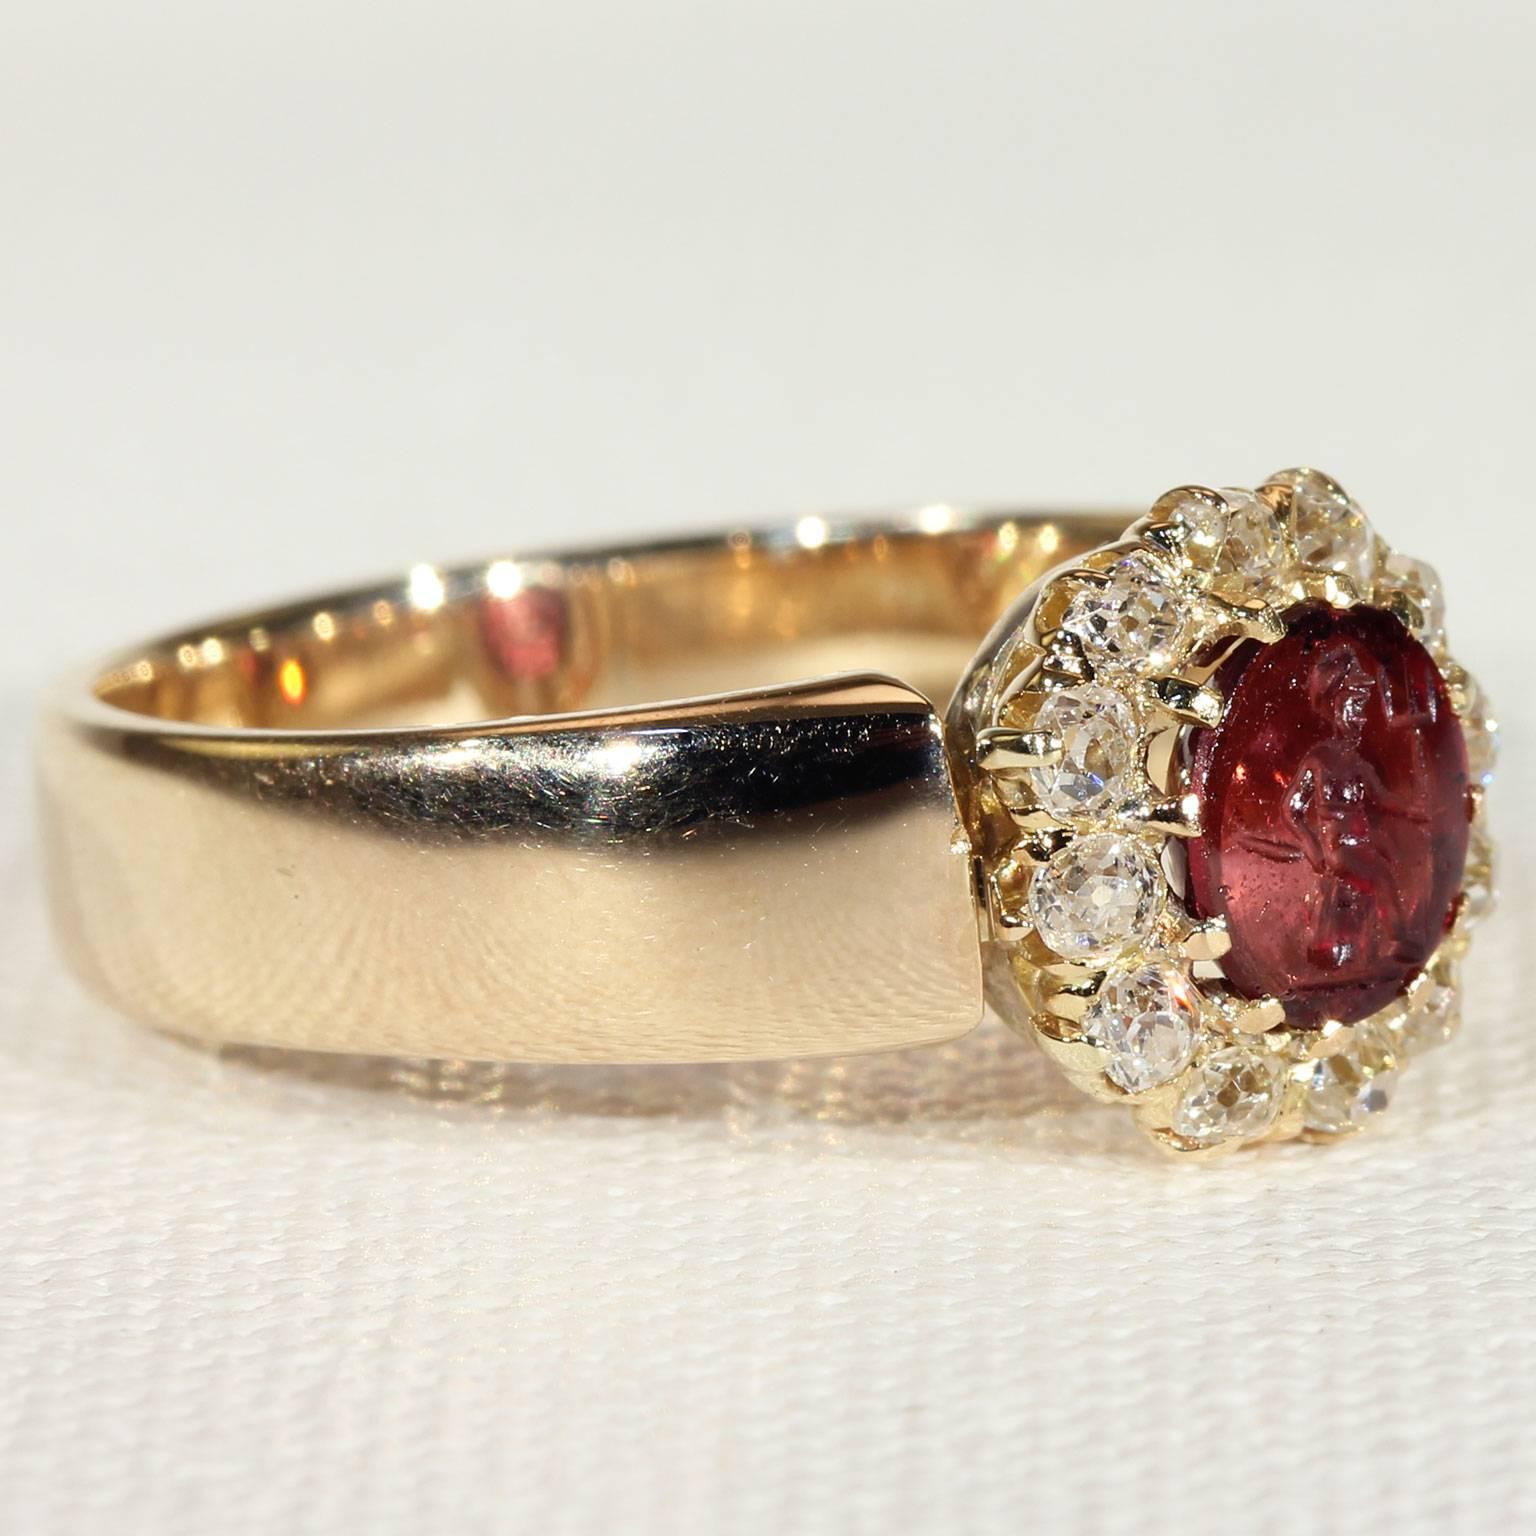 A cluster of Old European cut diamonds surround a carved intaglio garnet on this Victorian Era ring. Handcrafted and marked for the year 1900, this piece features a motif of a man with his pitchfork, which has been carved into the red garnet kissed